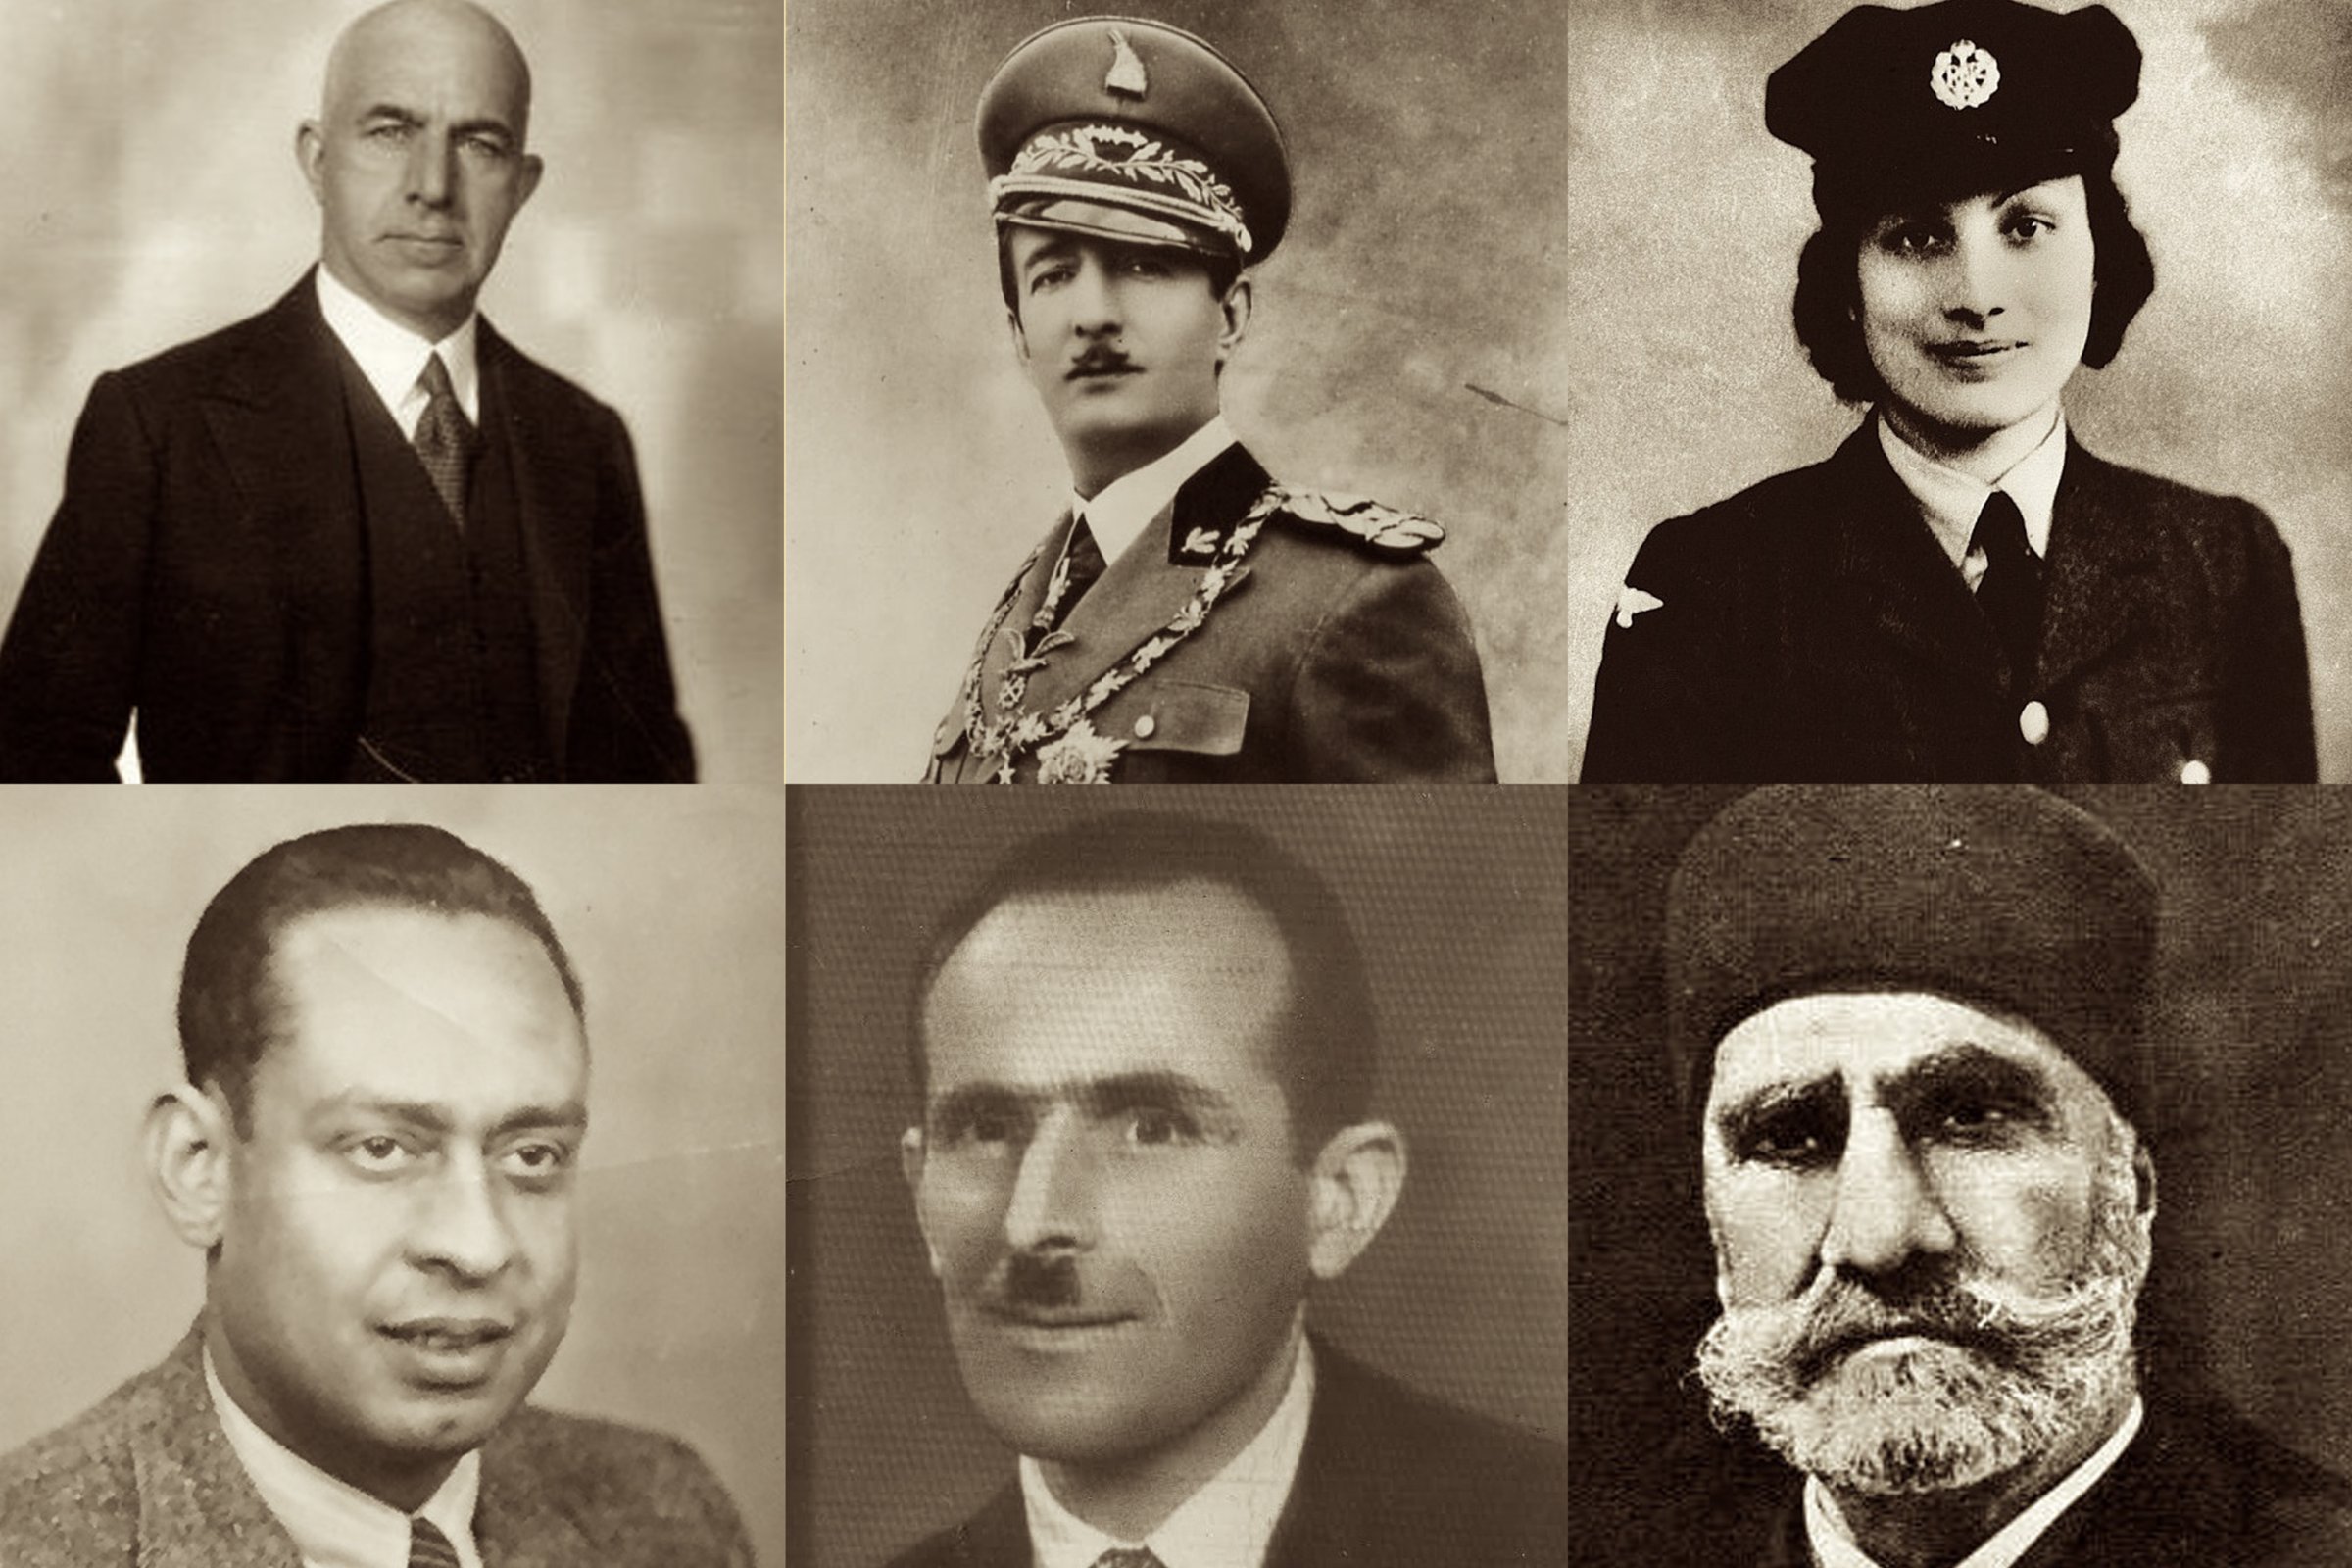 (Top row, left to right) Behic Erkin, King Zog I of Albania, Noor Inayat Khan; (Bottom row, left to right) Mohamed Helmy, Rifat Abdyl Hoxha, Ahmed Pasha Bey